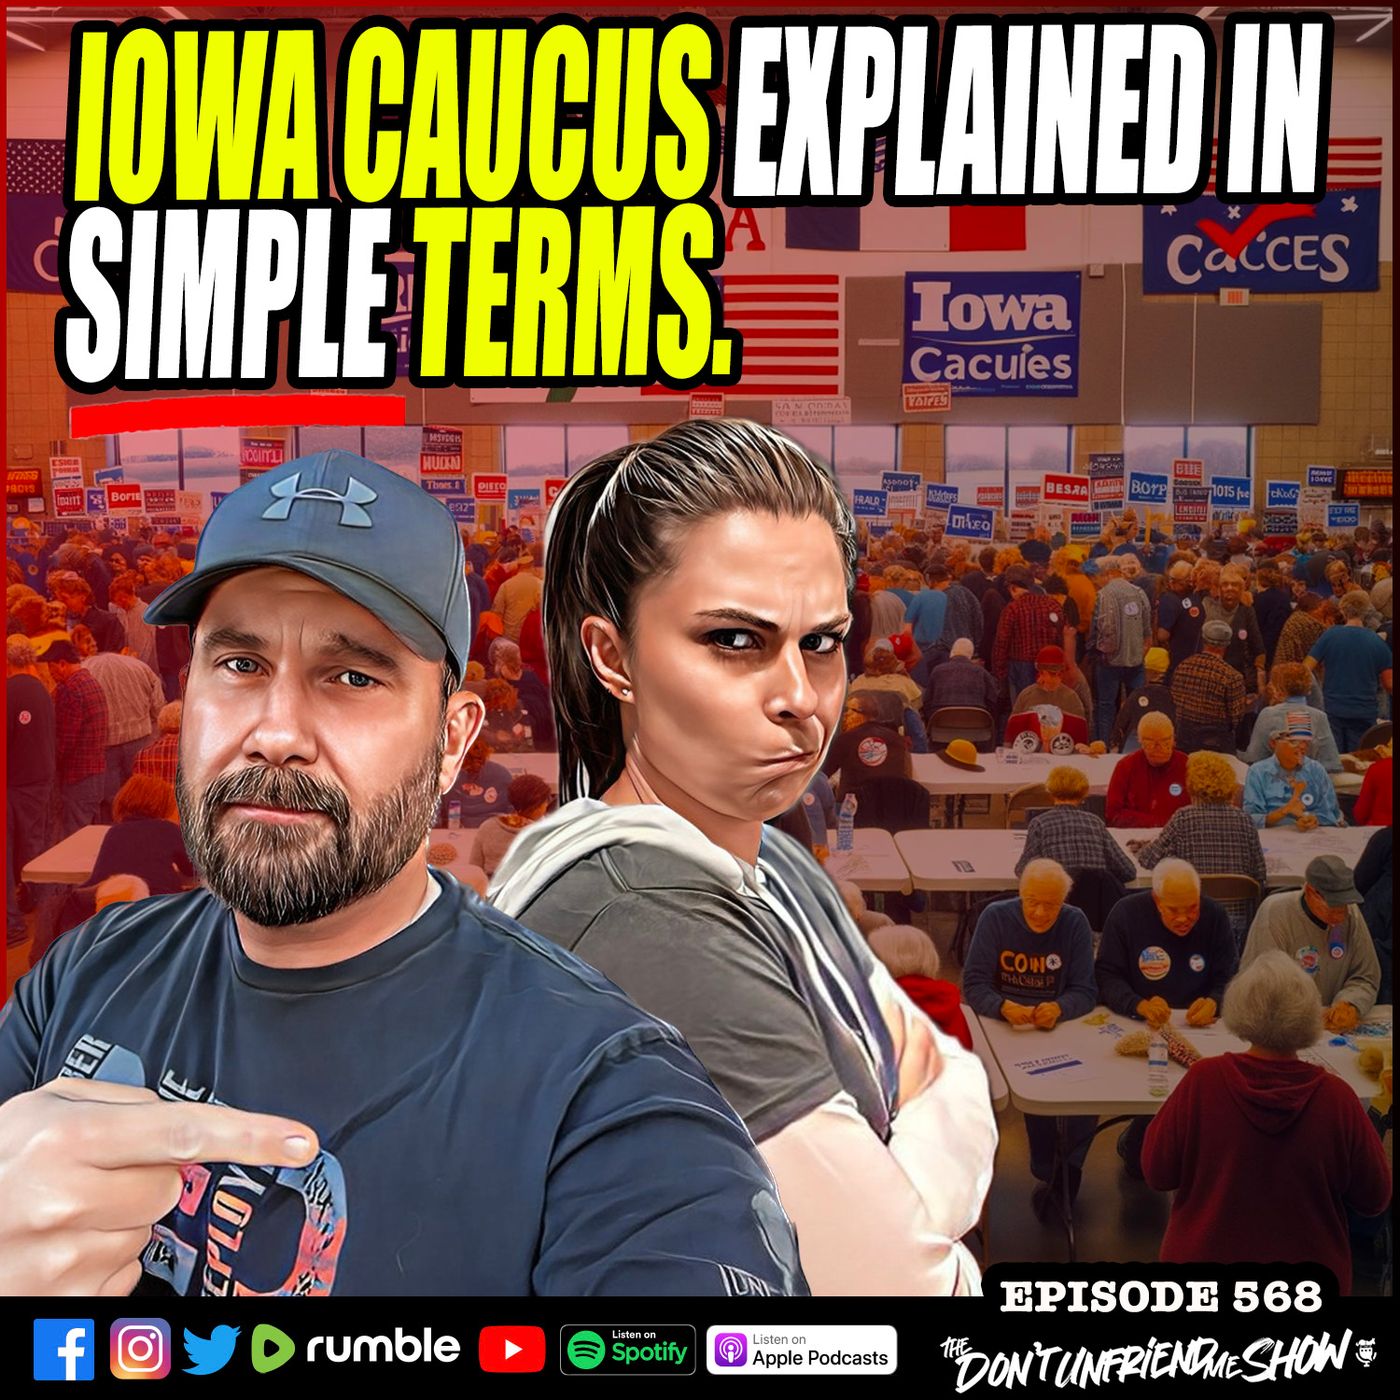 What Is The Iowa Caucus Explained In Simple Terms